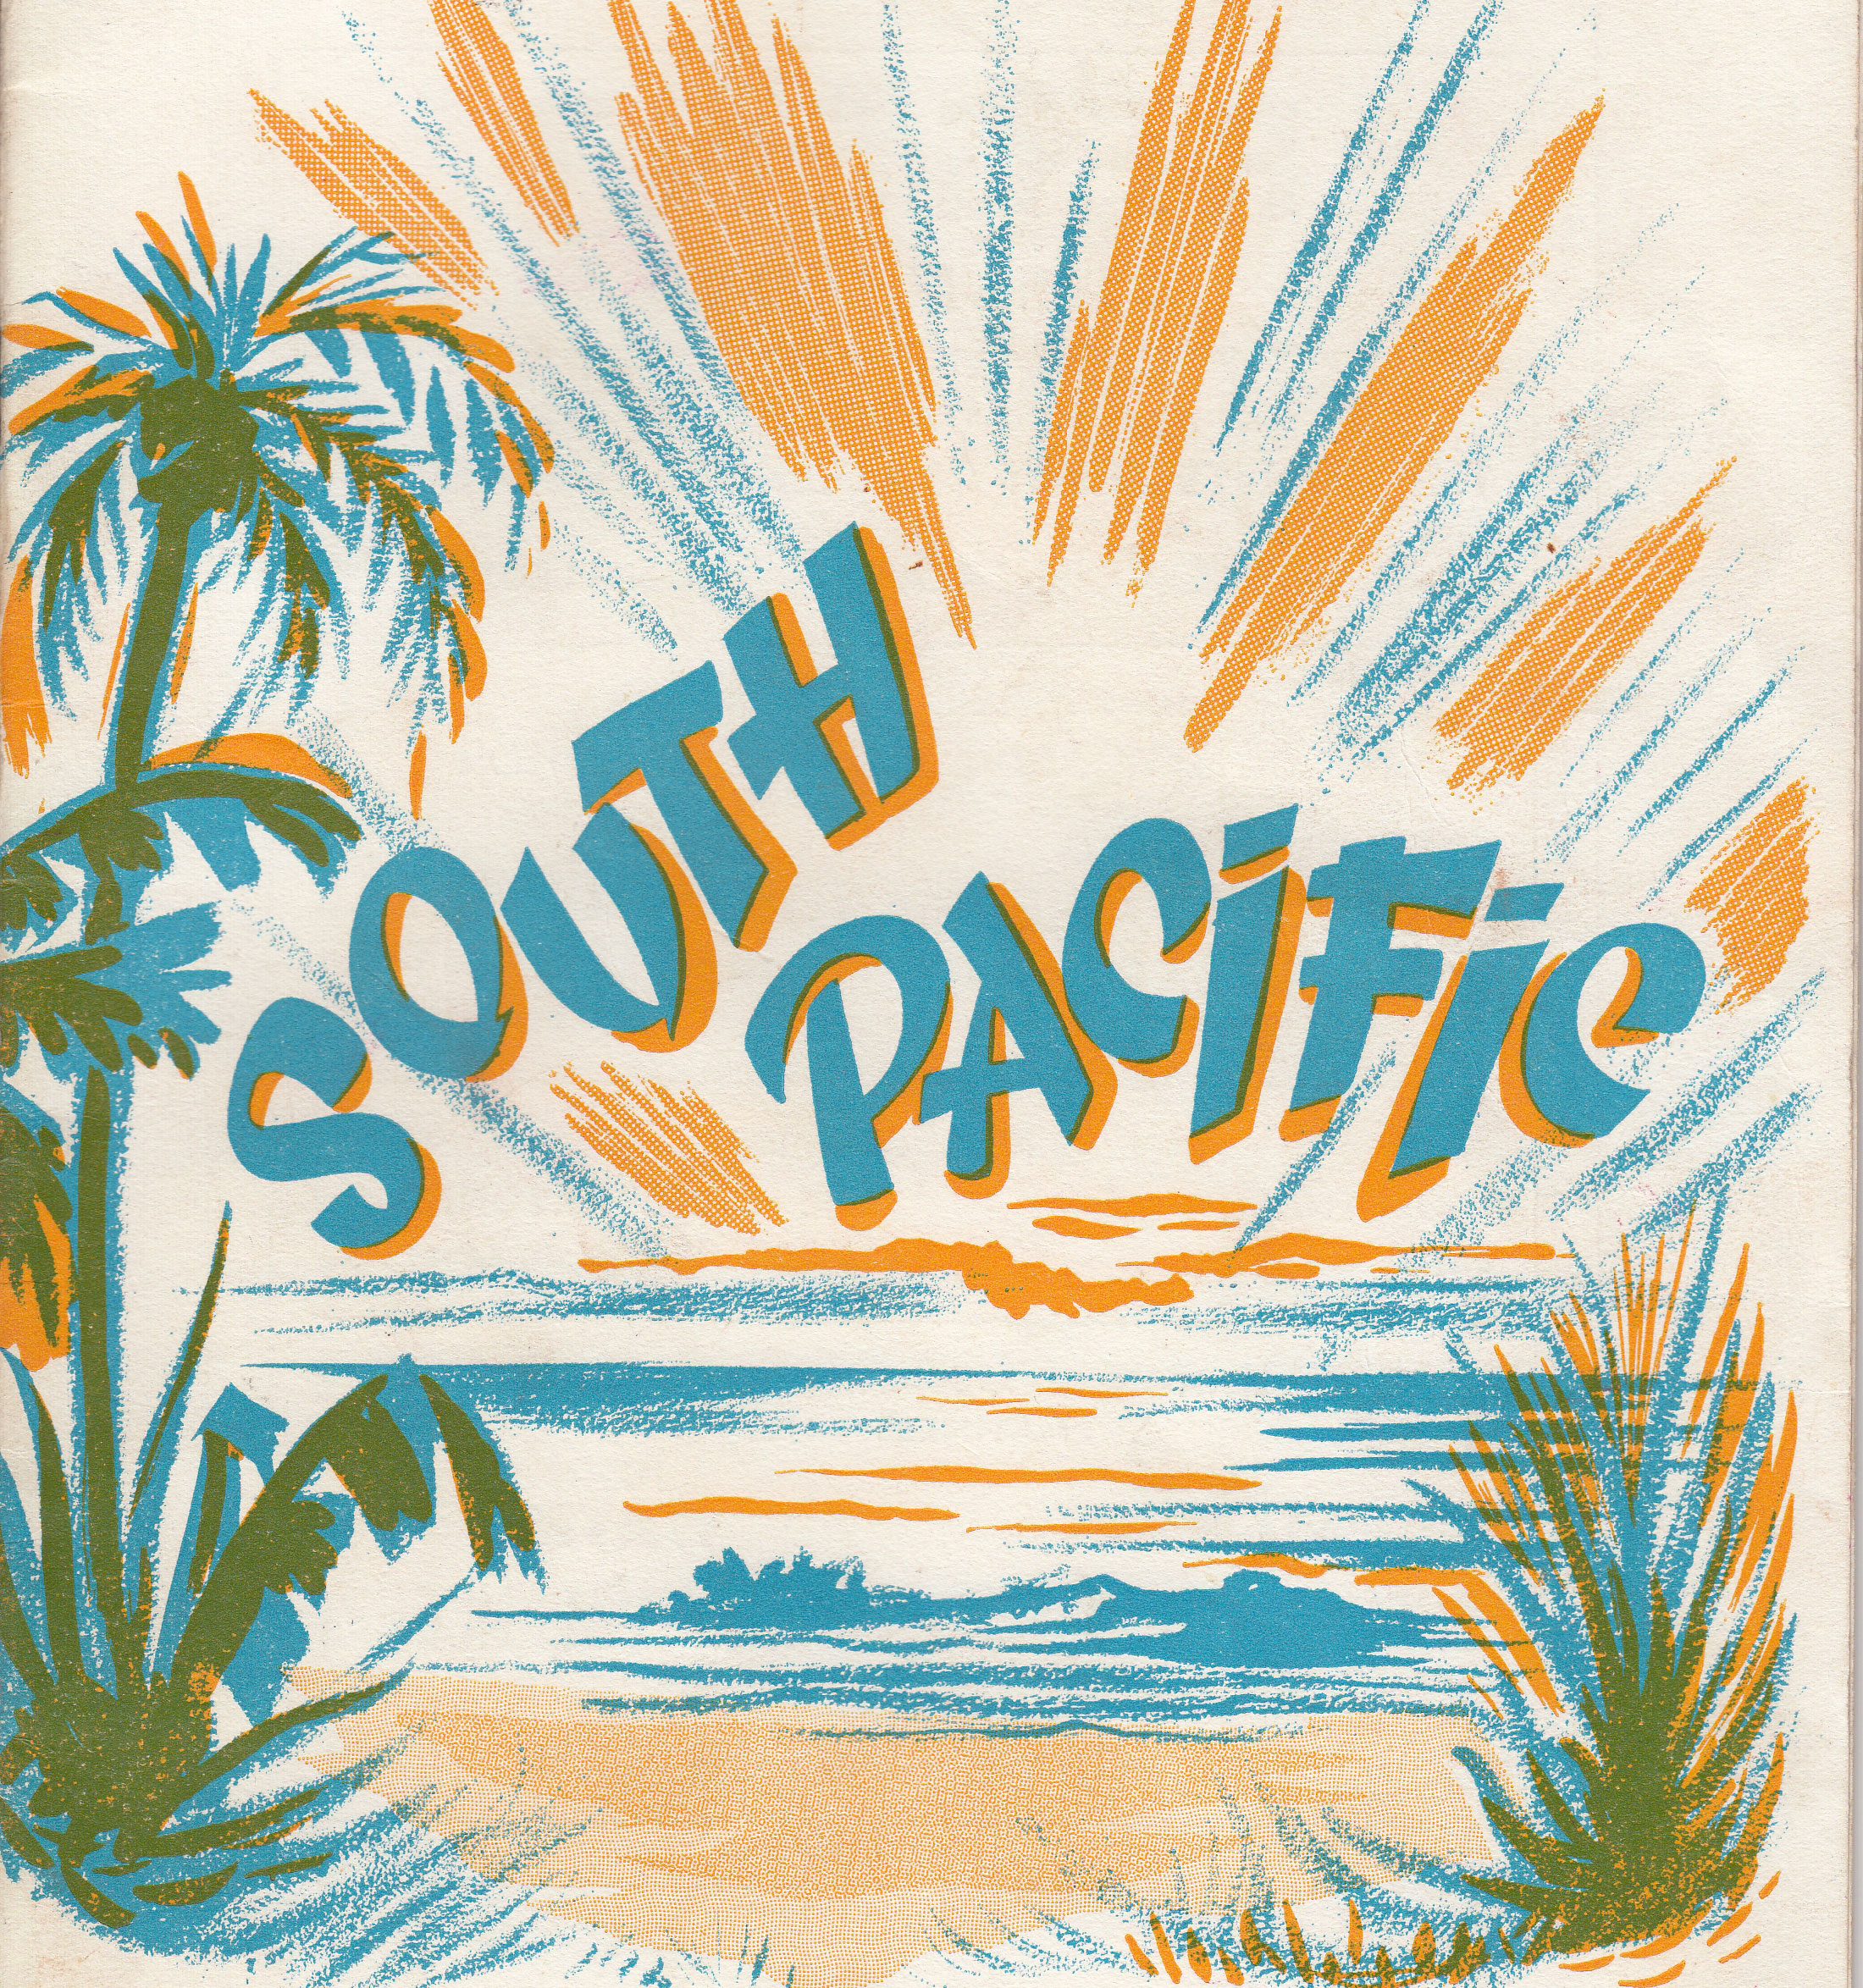 South Pacific (1962)